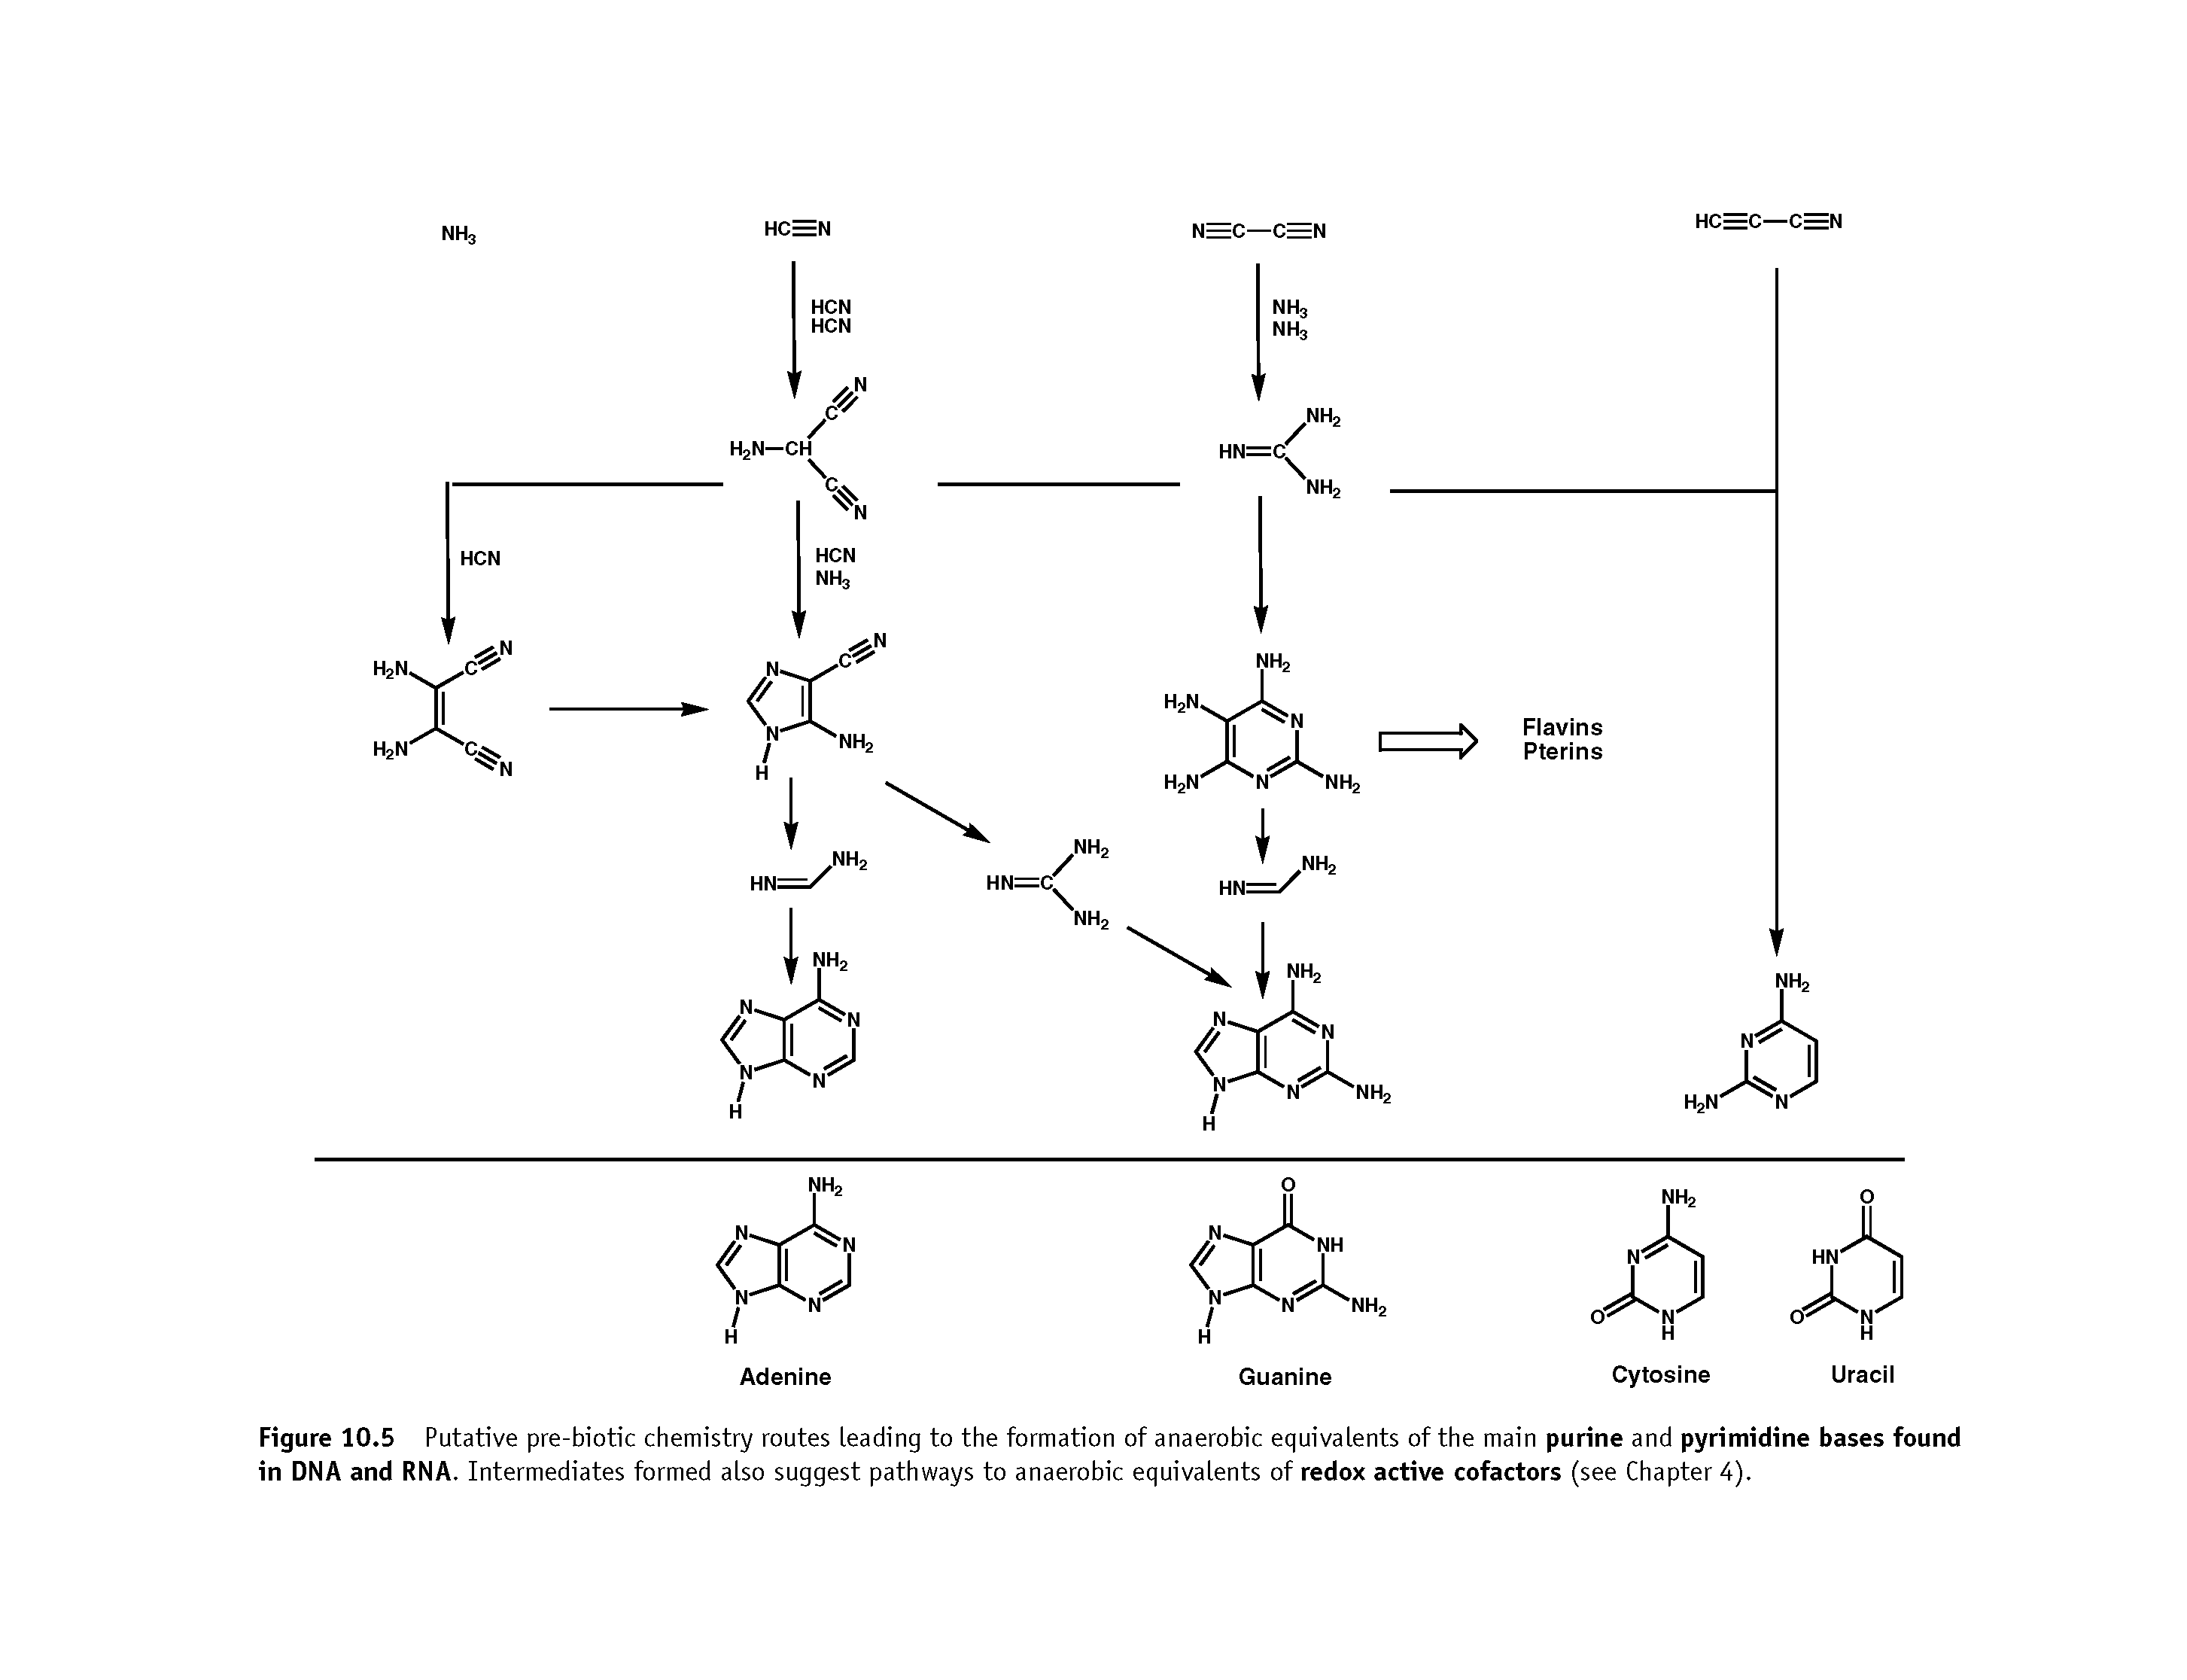 Figure 10.5 Putative pre-biotic chemistry routes Leading to the formation of anaerobic equivalents of the main purine and pyrimidine bases found in DNA and RNA. Intermediates formed also suggest pathways to anaerobic equivalents of redox active cofactors (see Chapter 4).